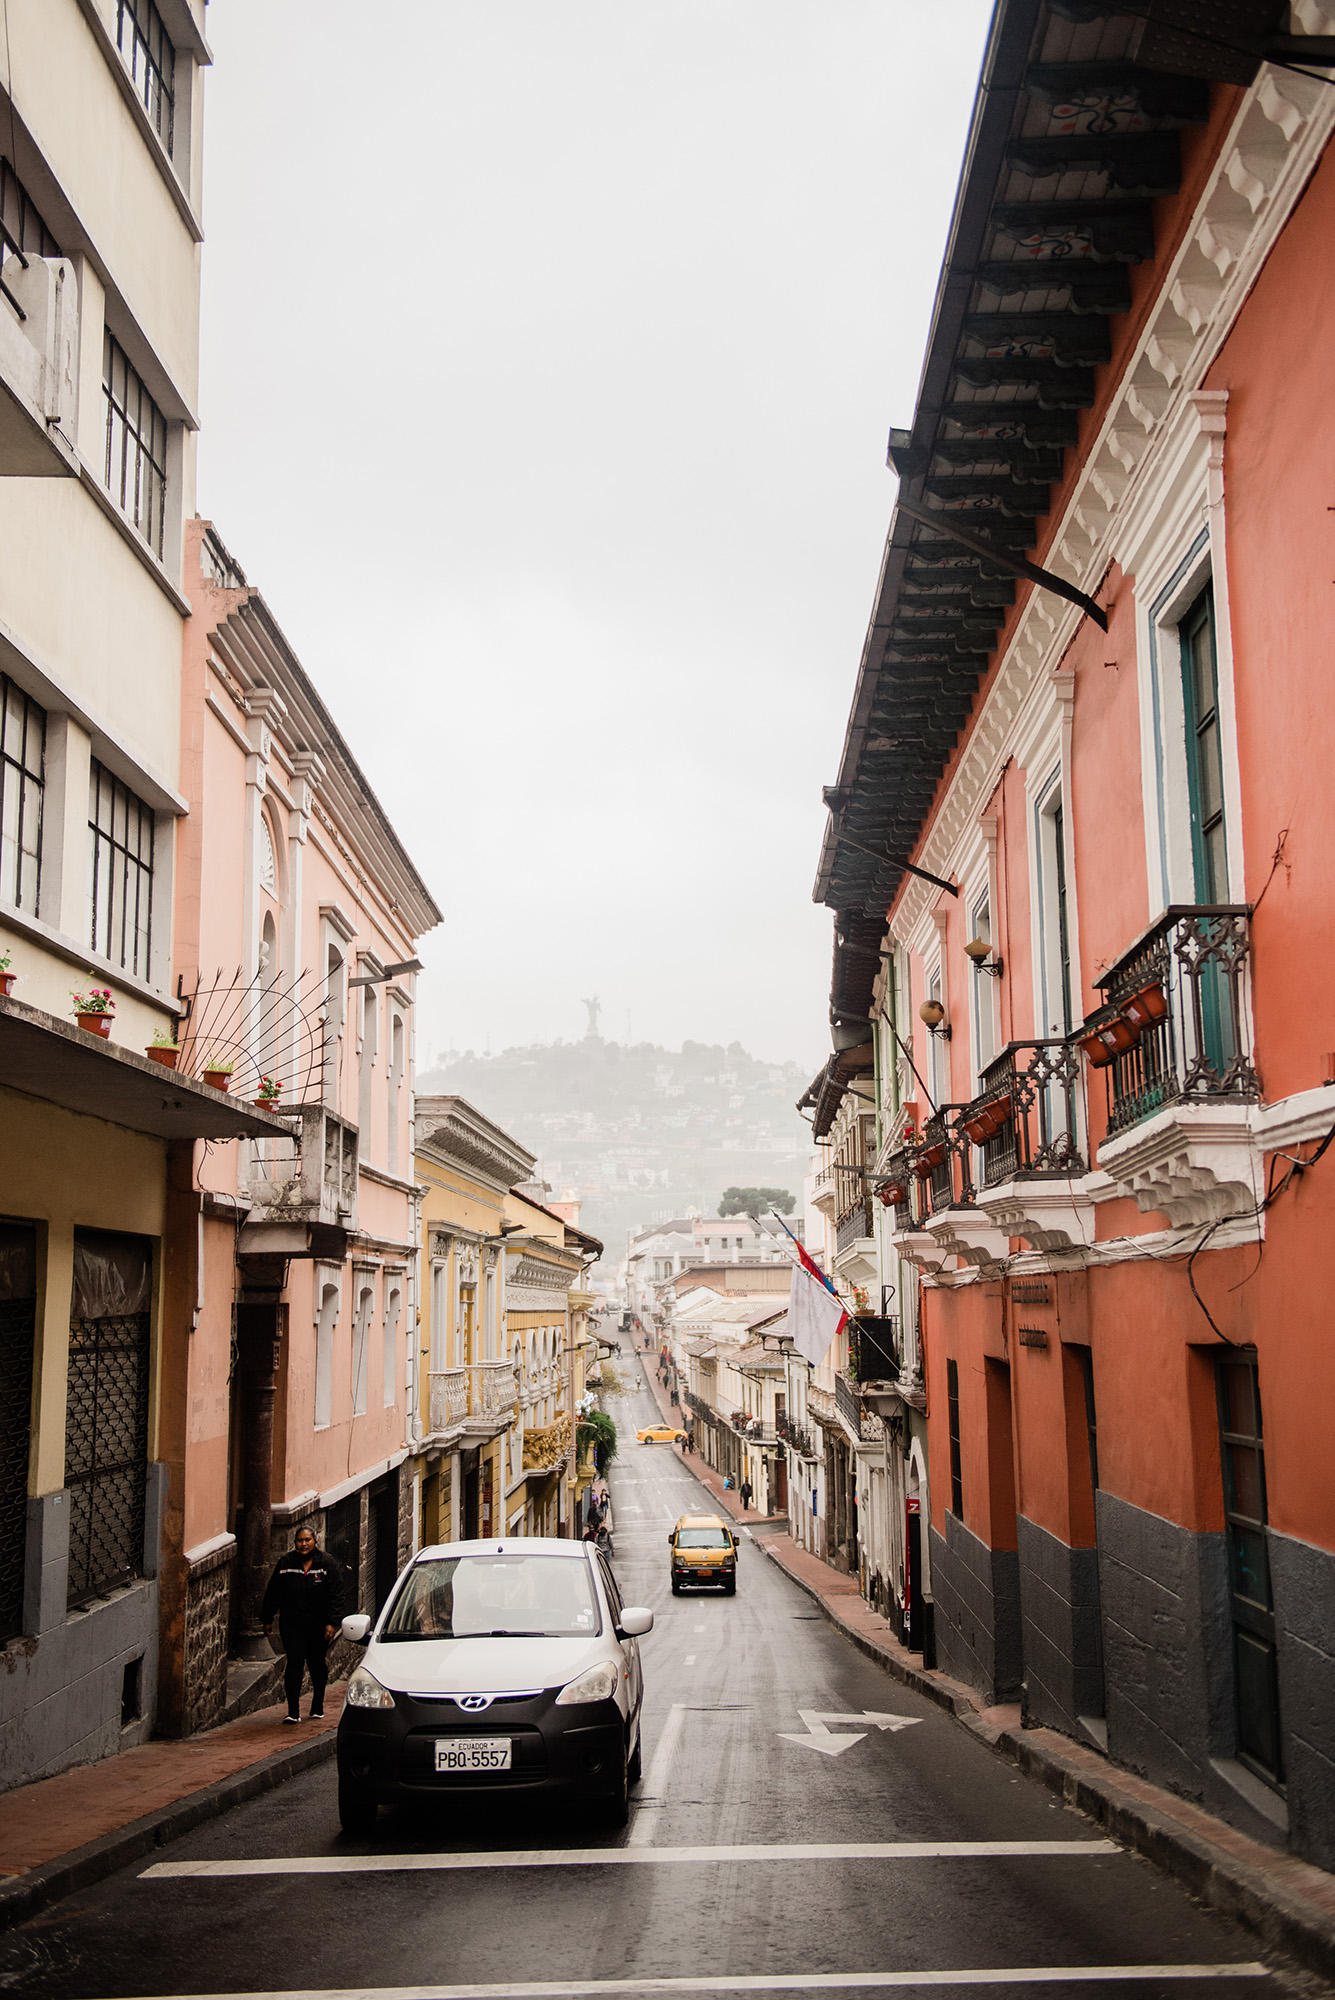 A Full Day in Quito